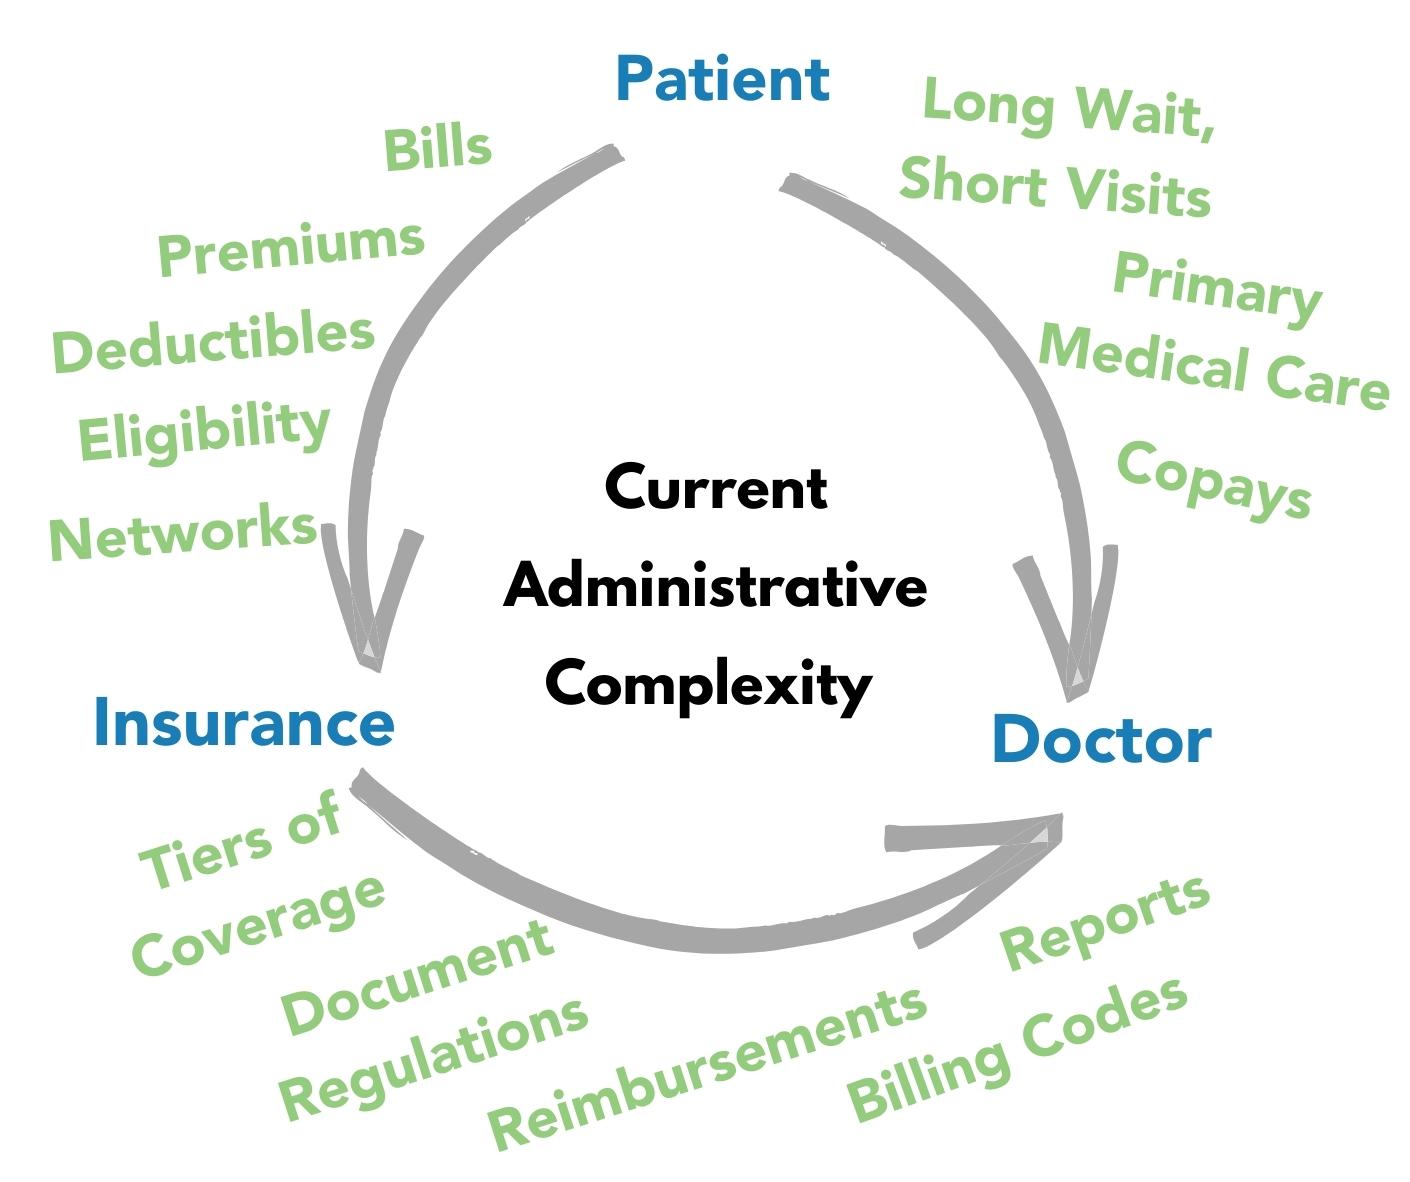 Current Administrative Complexity